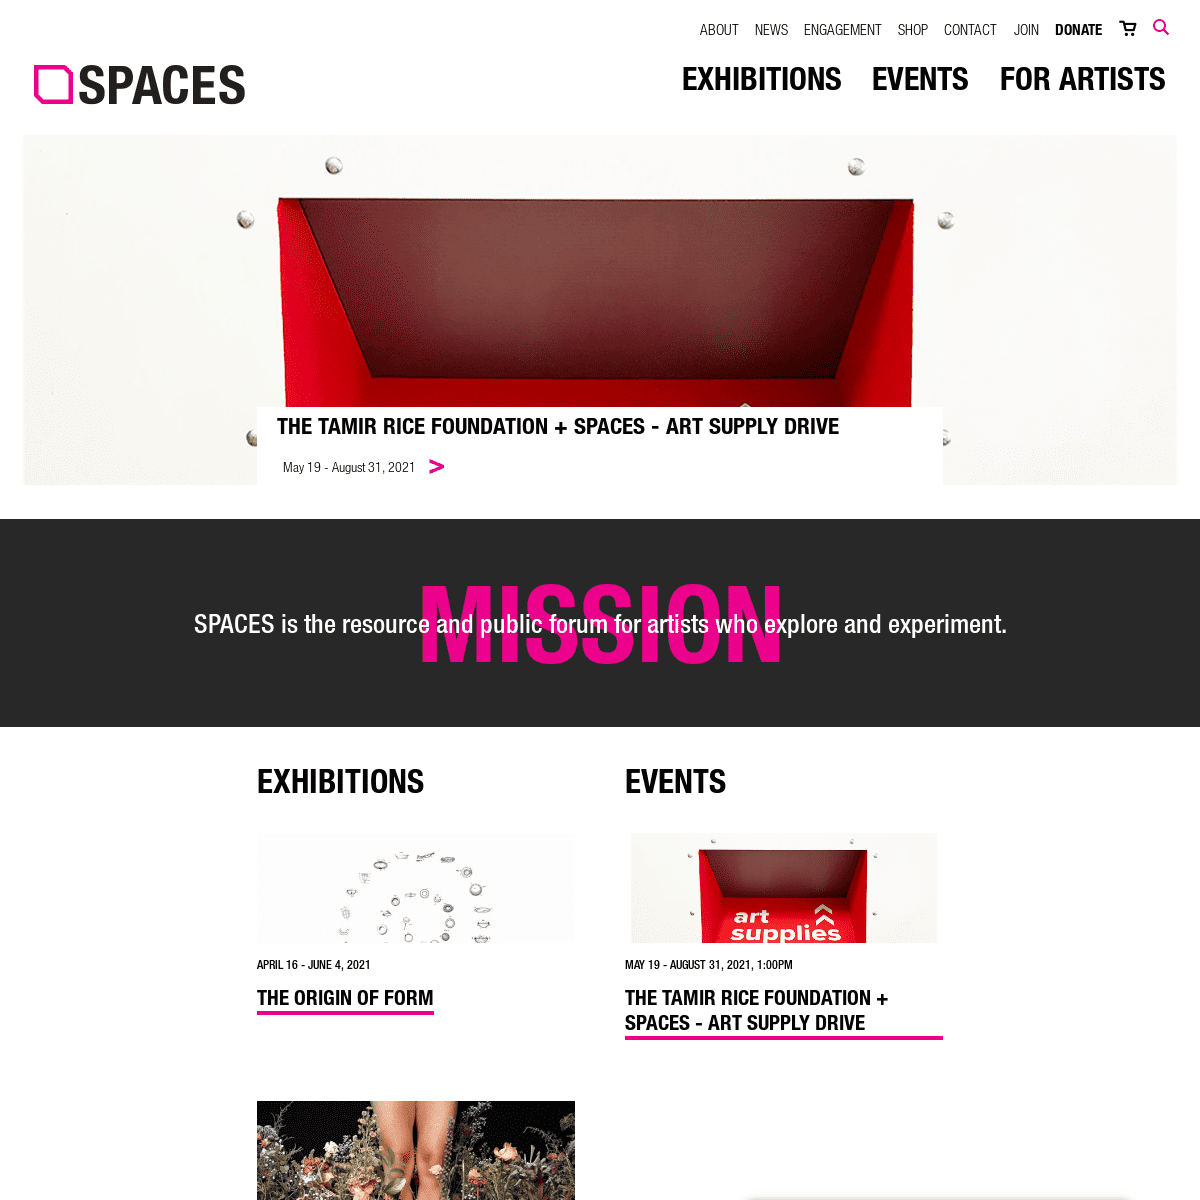 A complete backup of https://spacesgallery.org